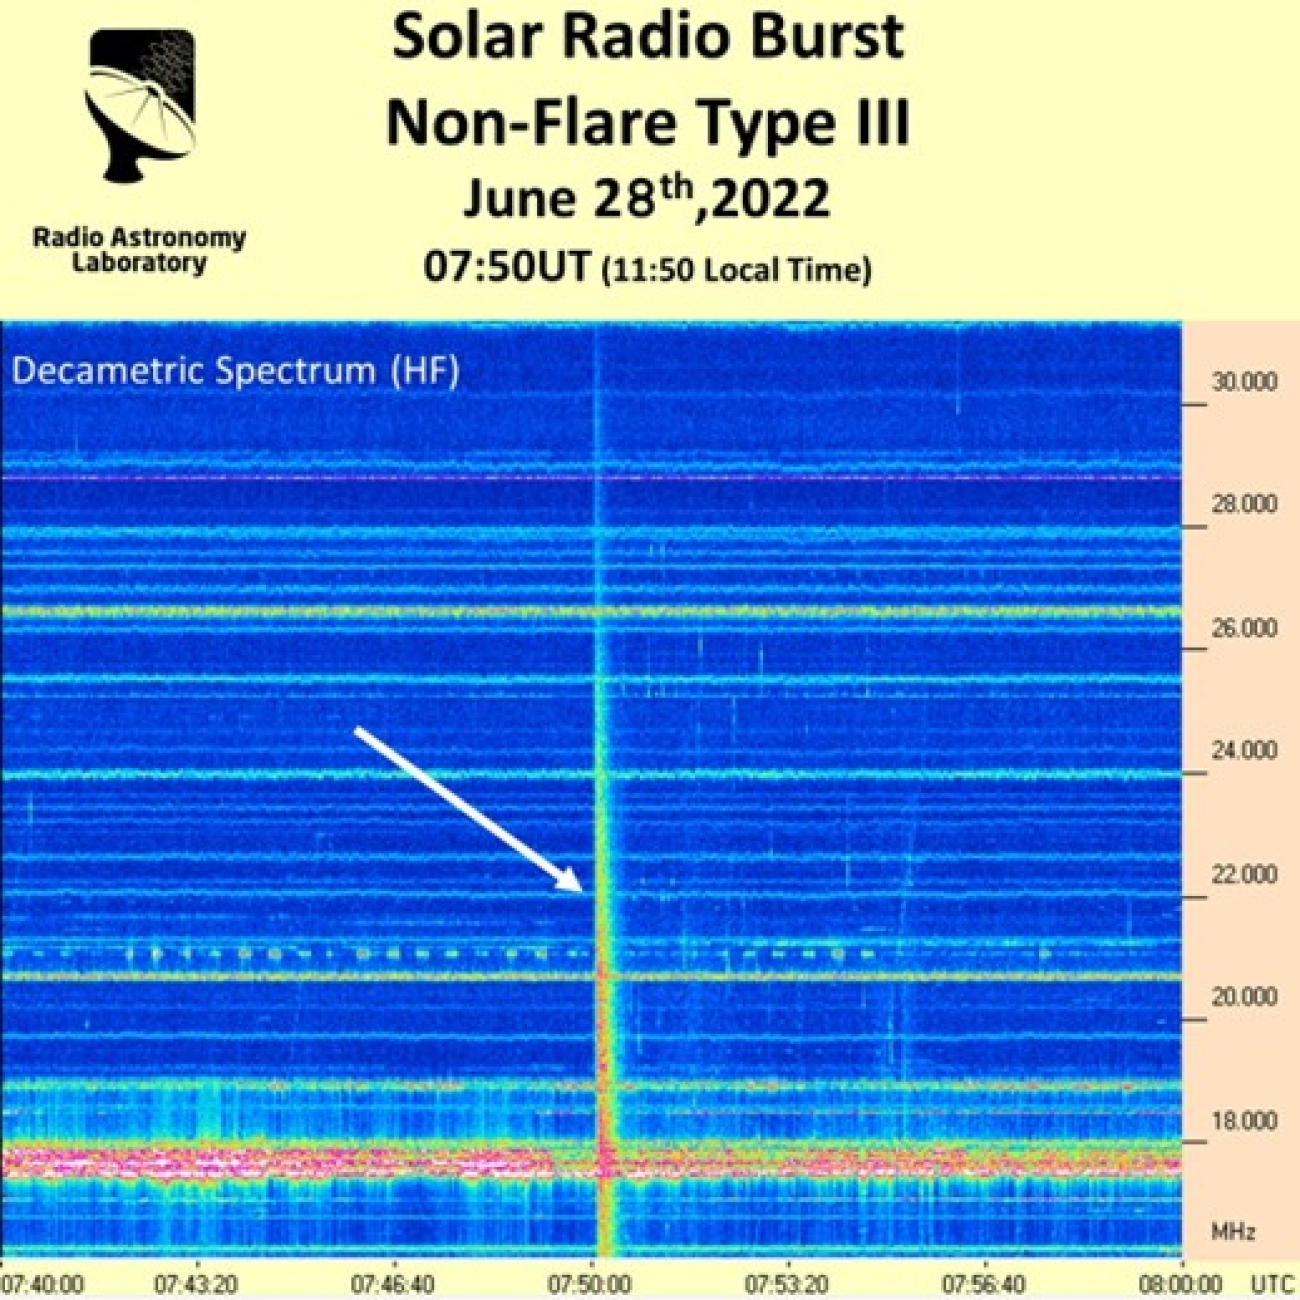 A Strong Solar Radio Burst Observed by the SAASST Radio Spectrometer